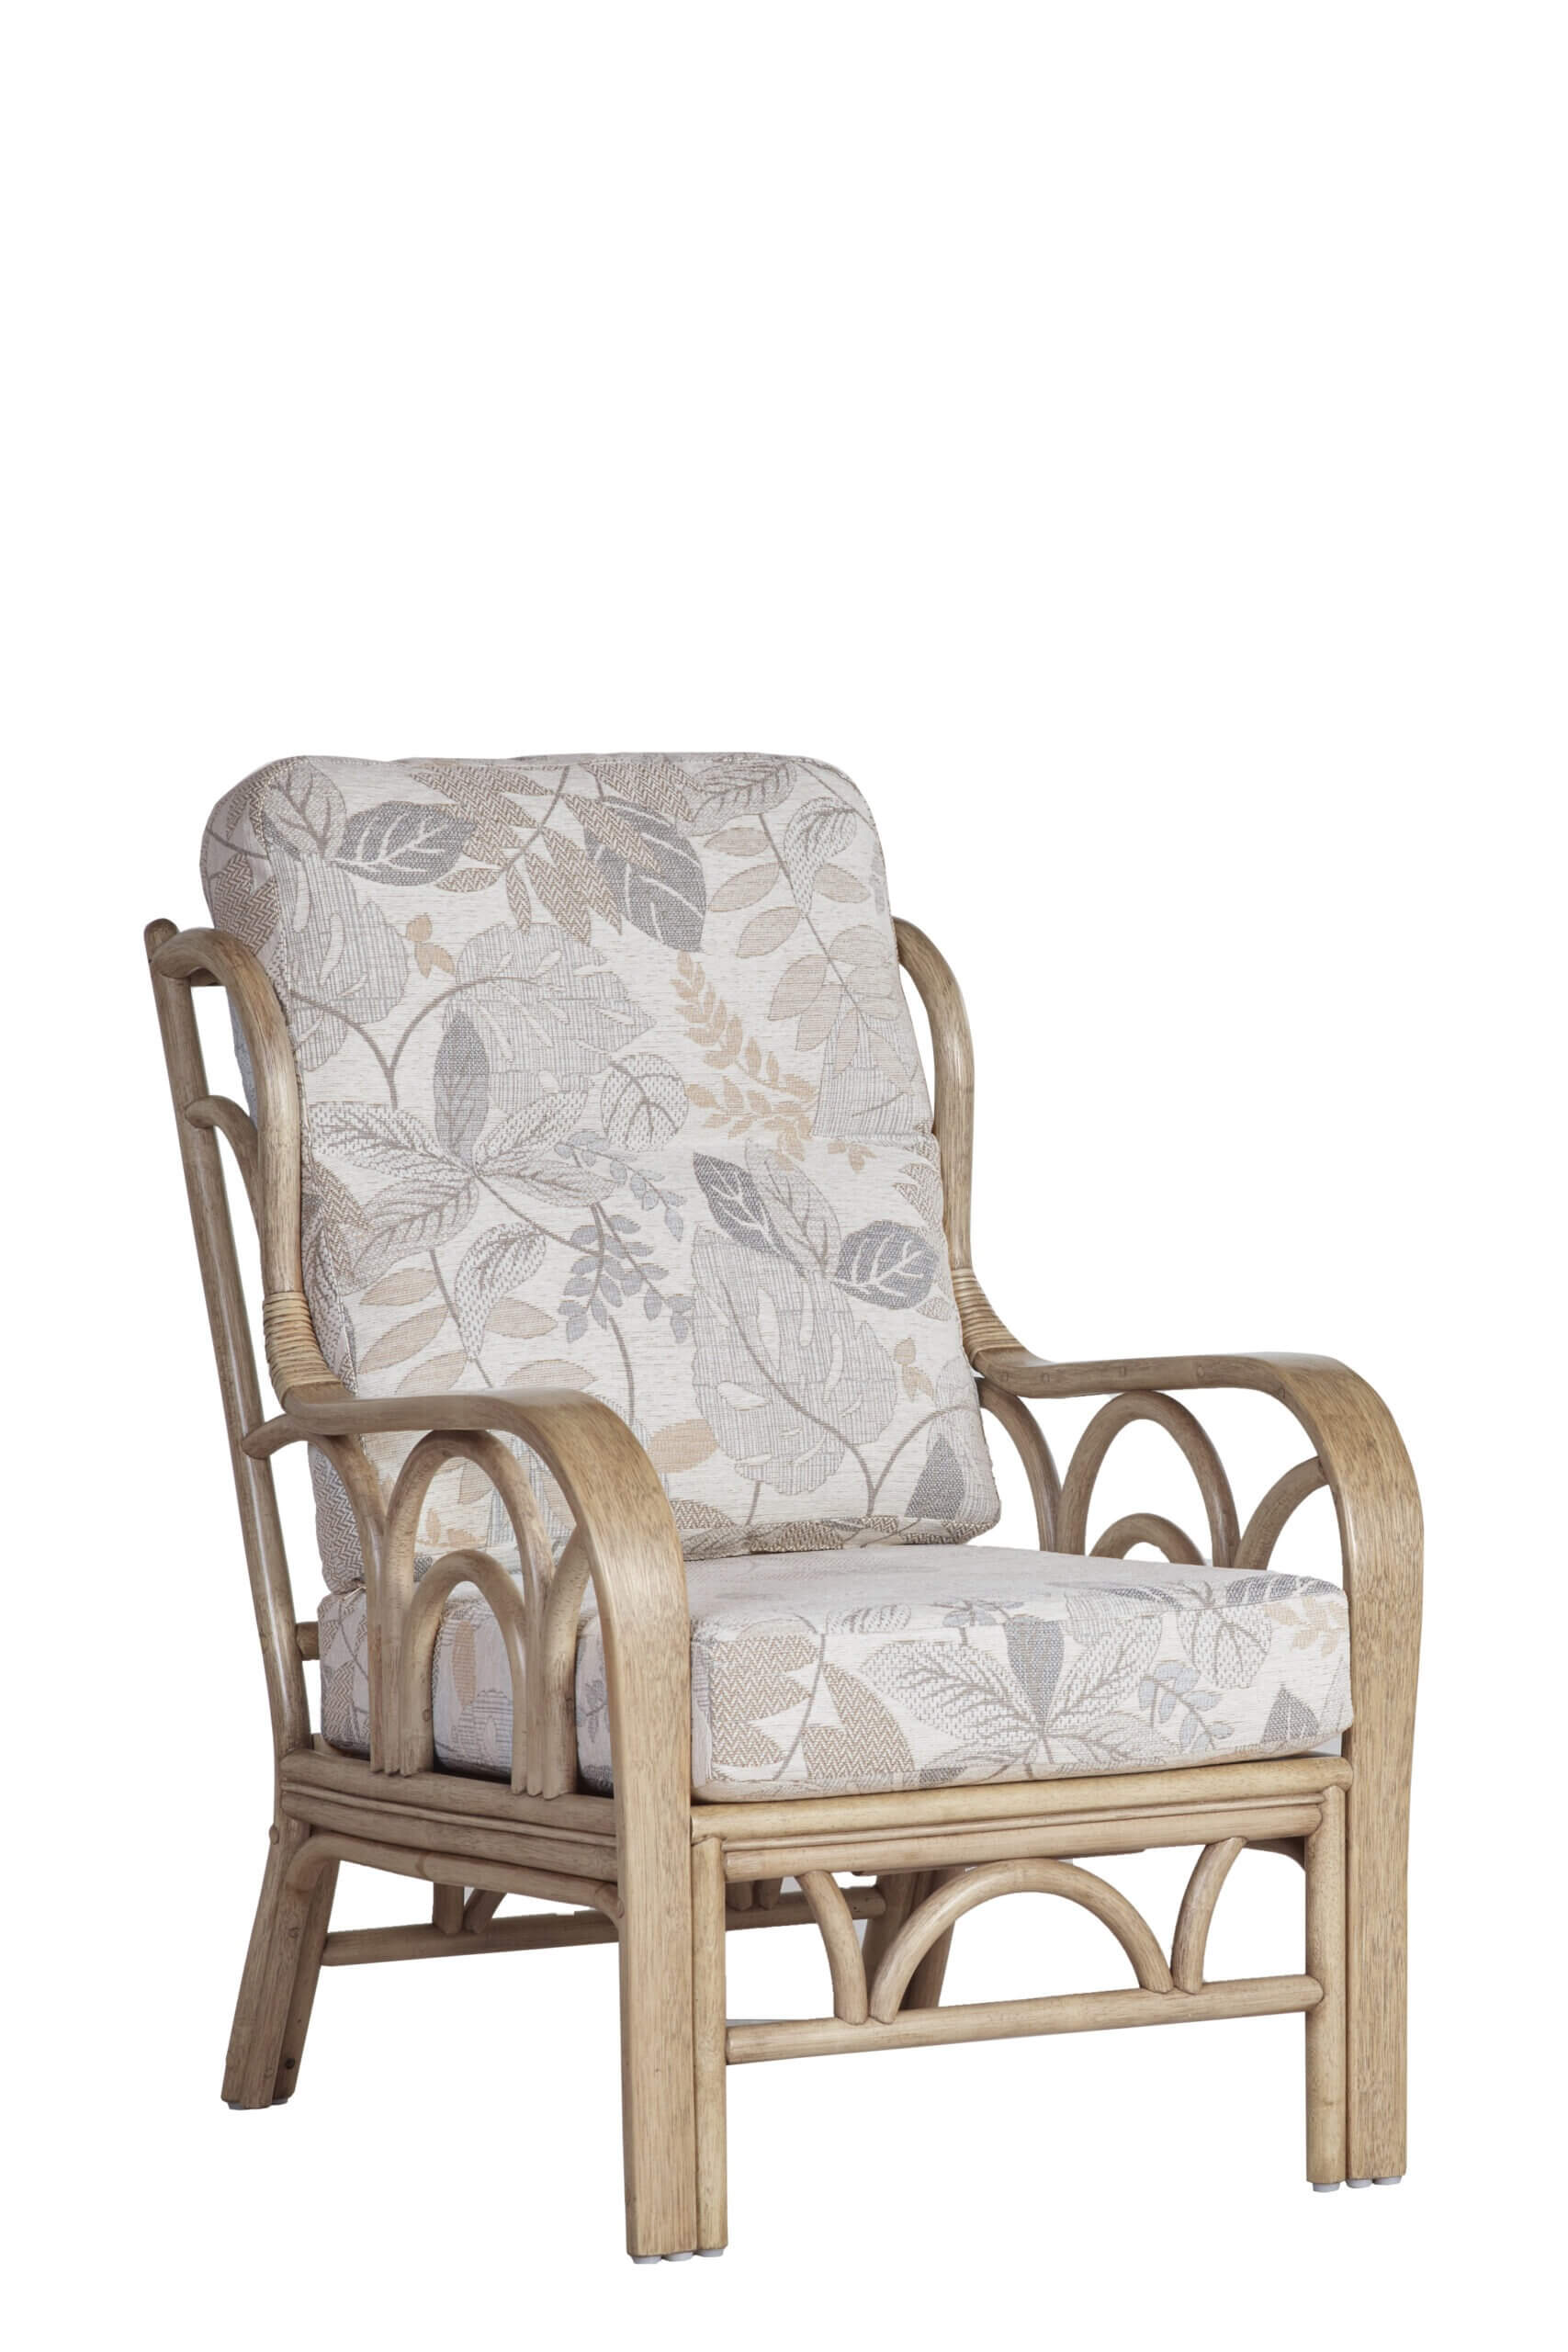 Showing image for Catania armchair